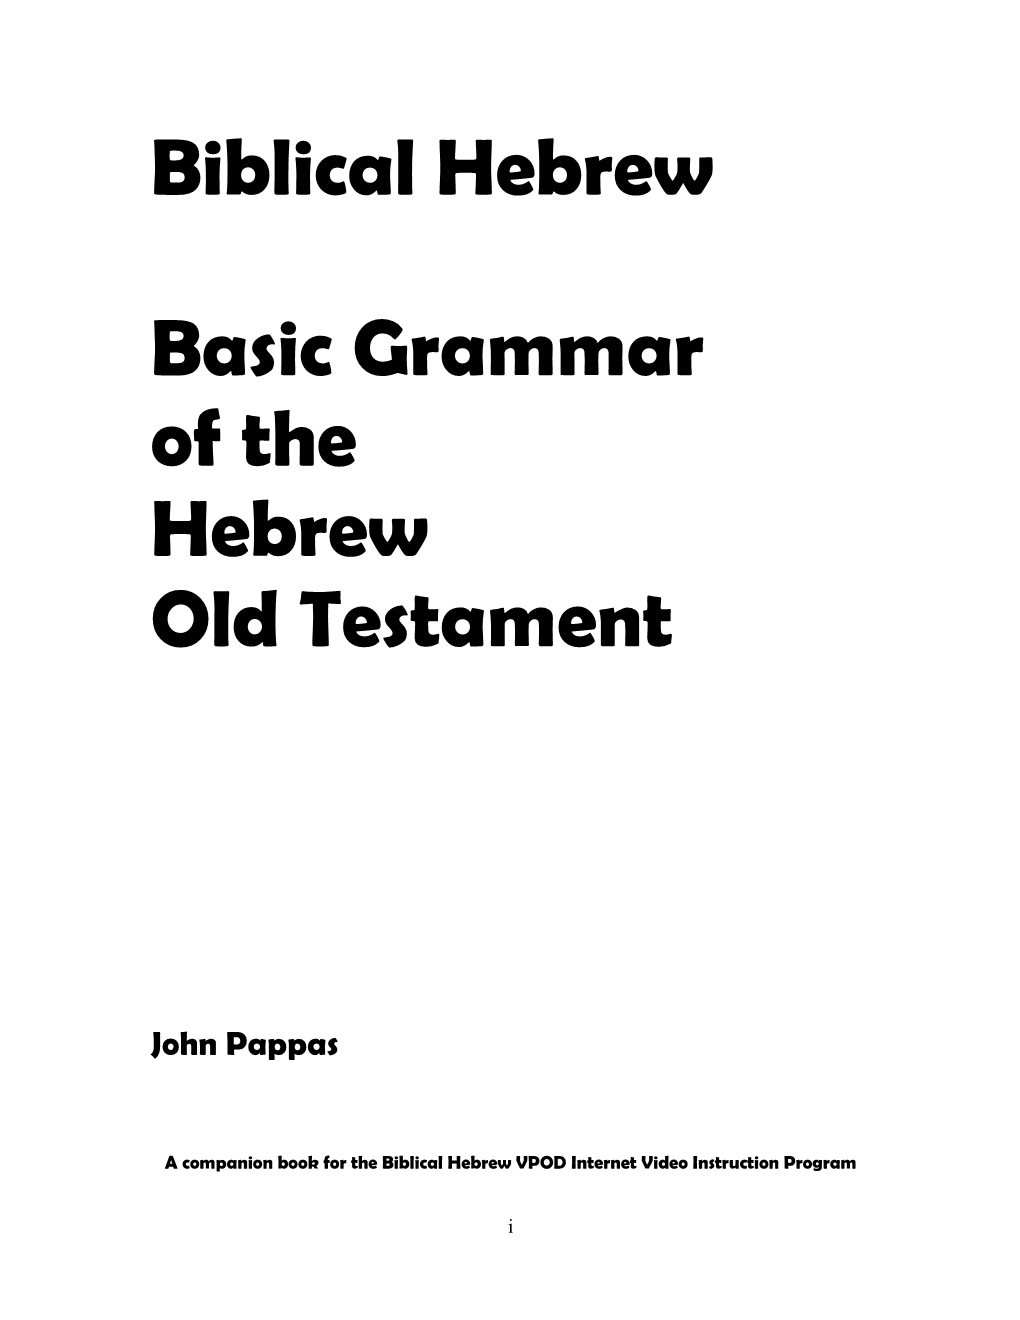 Bible Hebrew VPOD Produced by the Author